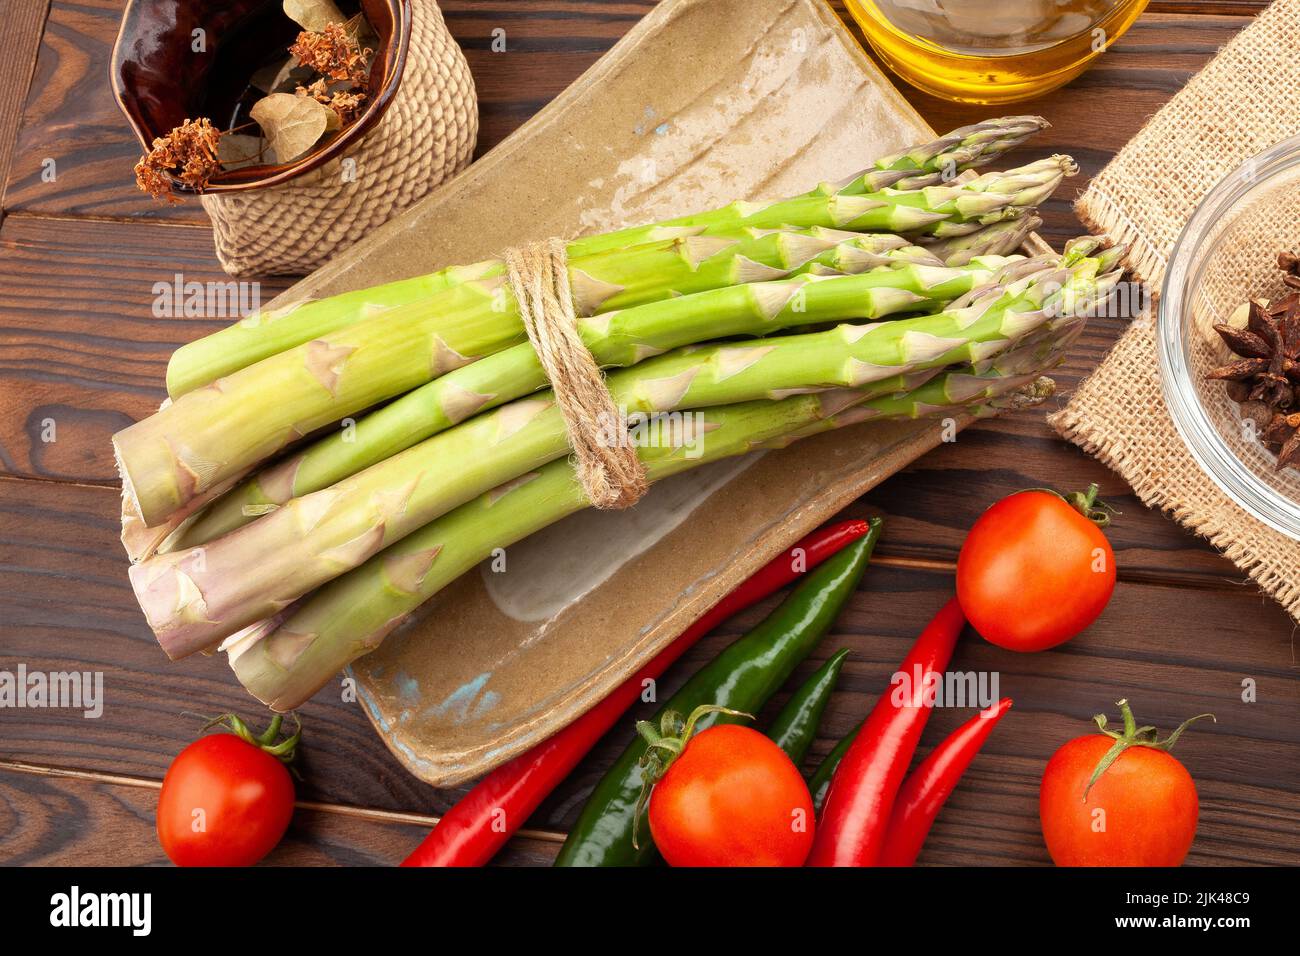 asparagus bunch on wood background Stock Photo